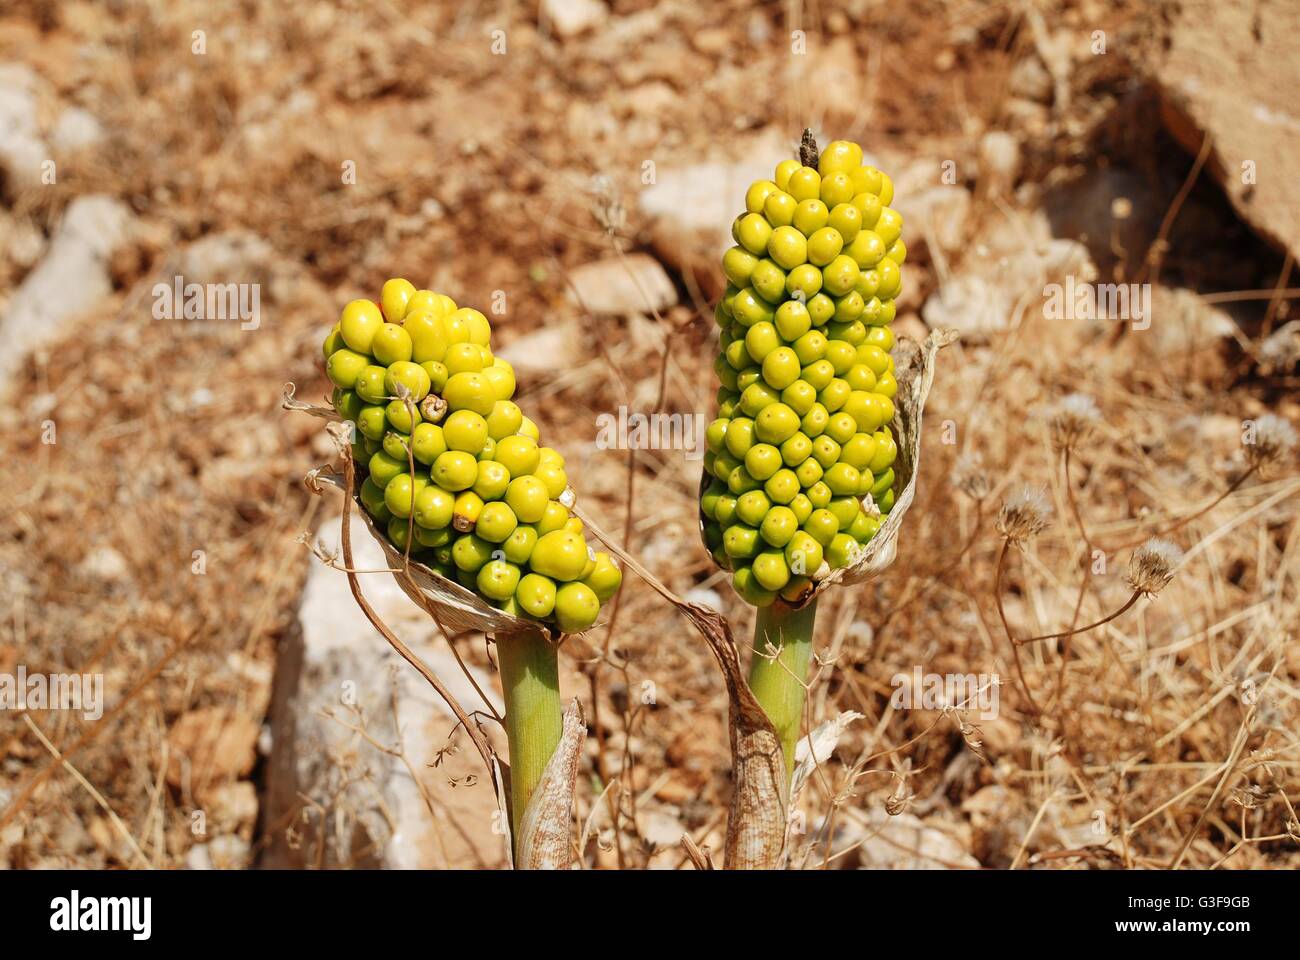 Green berries on the seed heads of a Dragon Lily (Dracunculus Vulgaris) plant growing at Chorio on the Greek island of Halki. Stock Photo